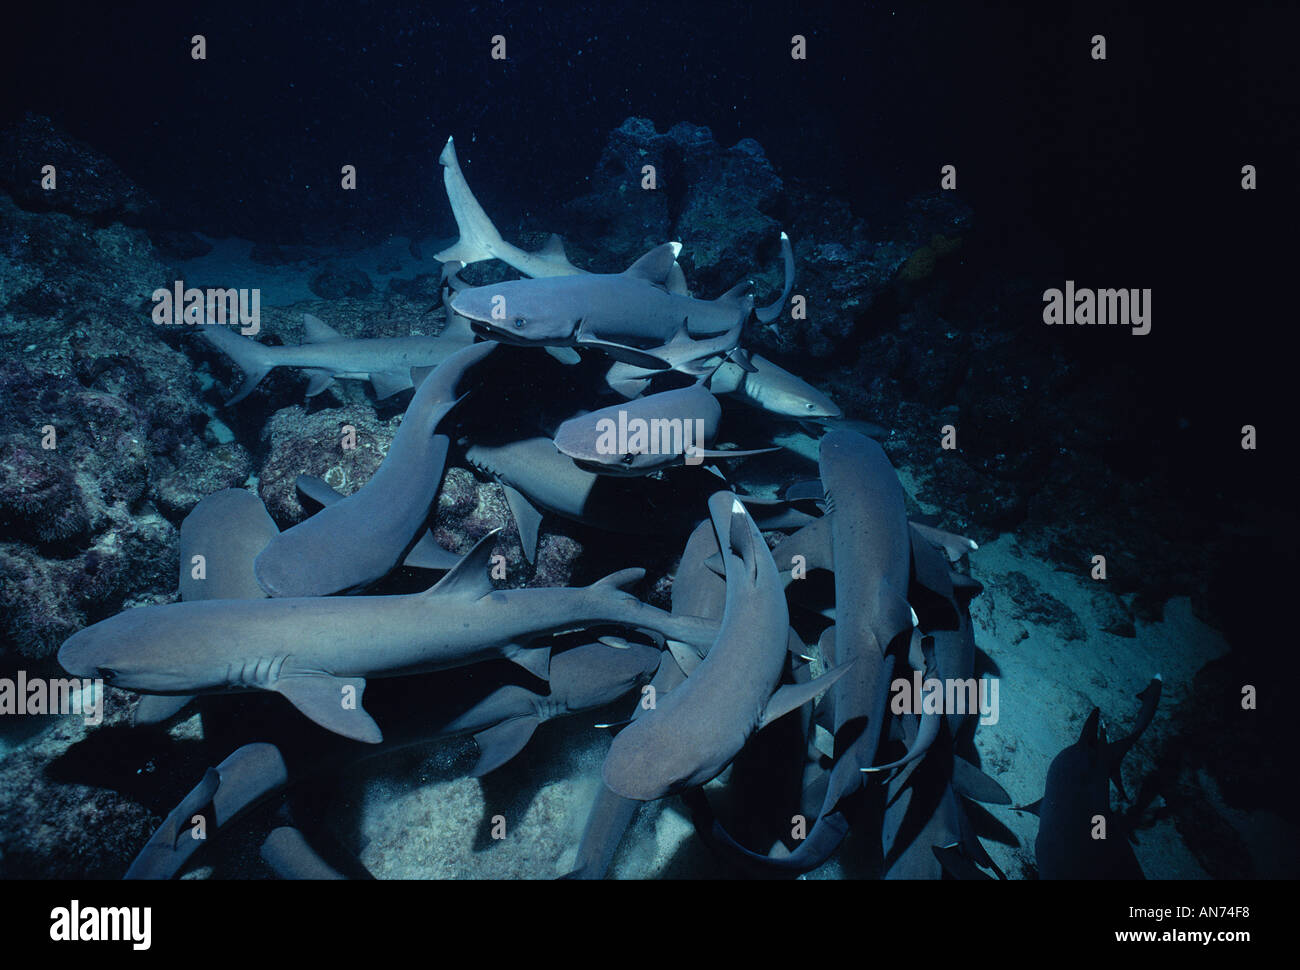 Pack of Whitetip Reef Sharks search for food in coral bed Stock Photo